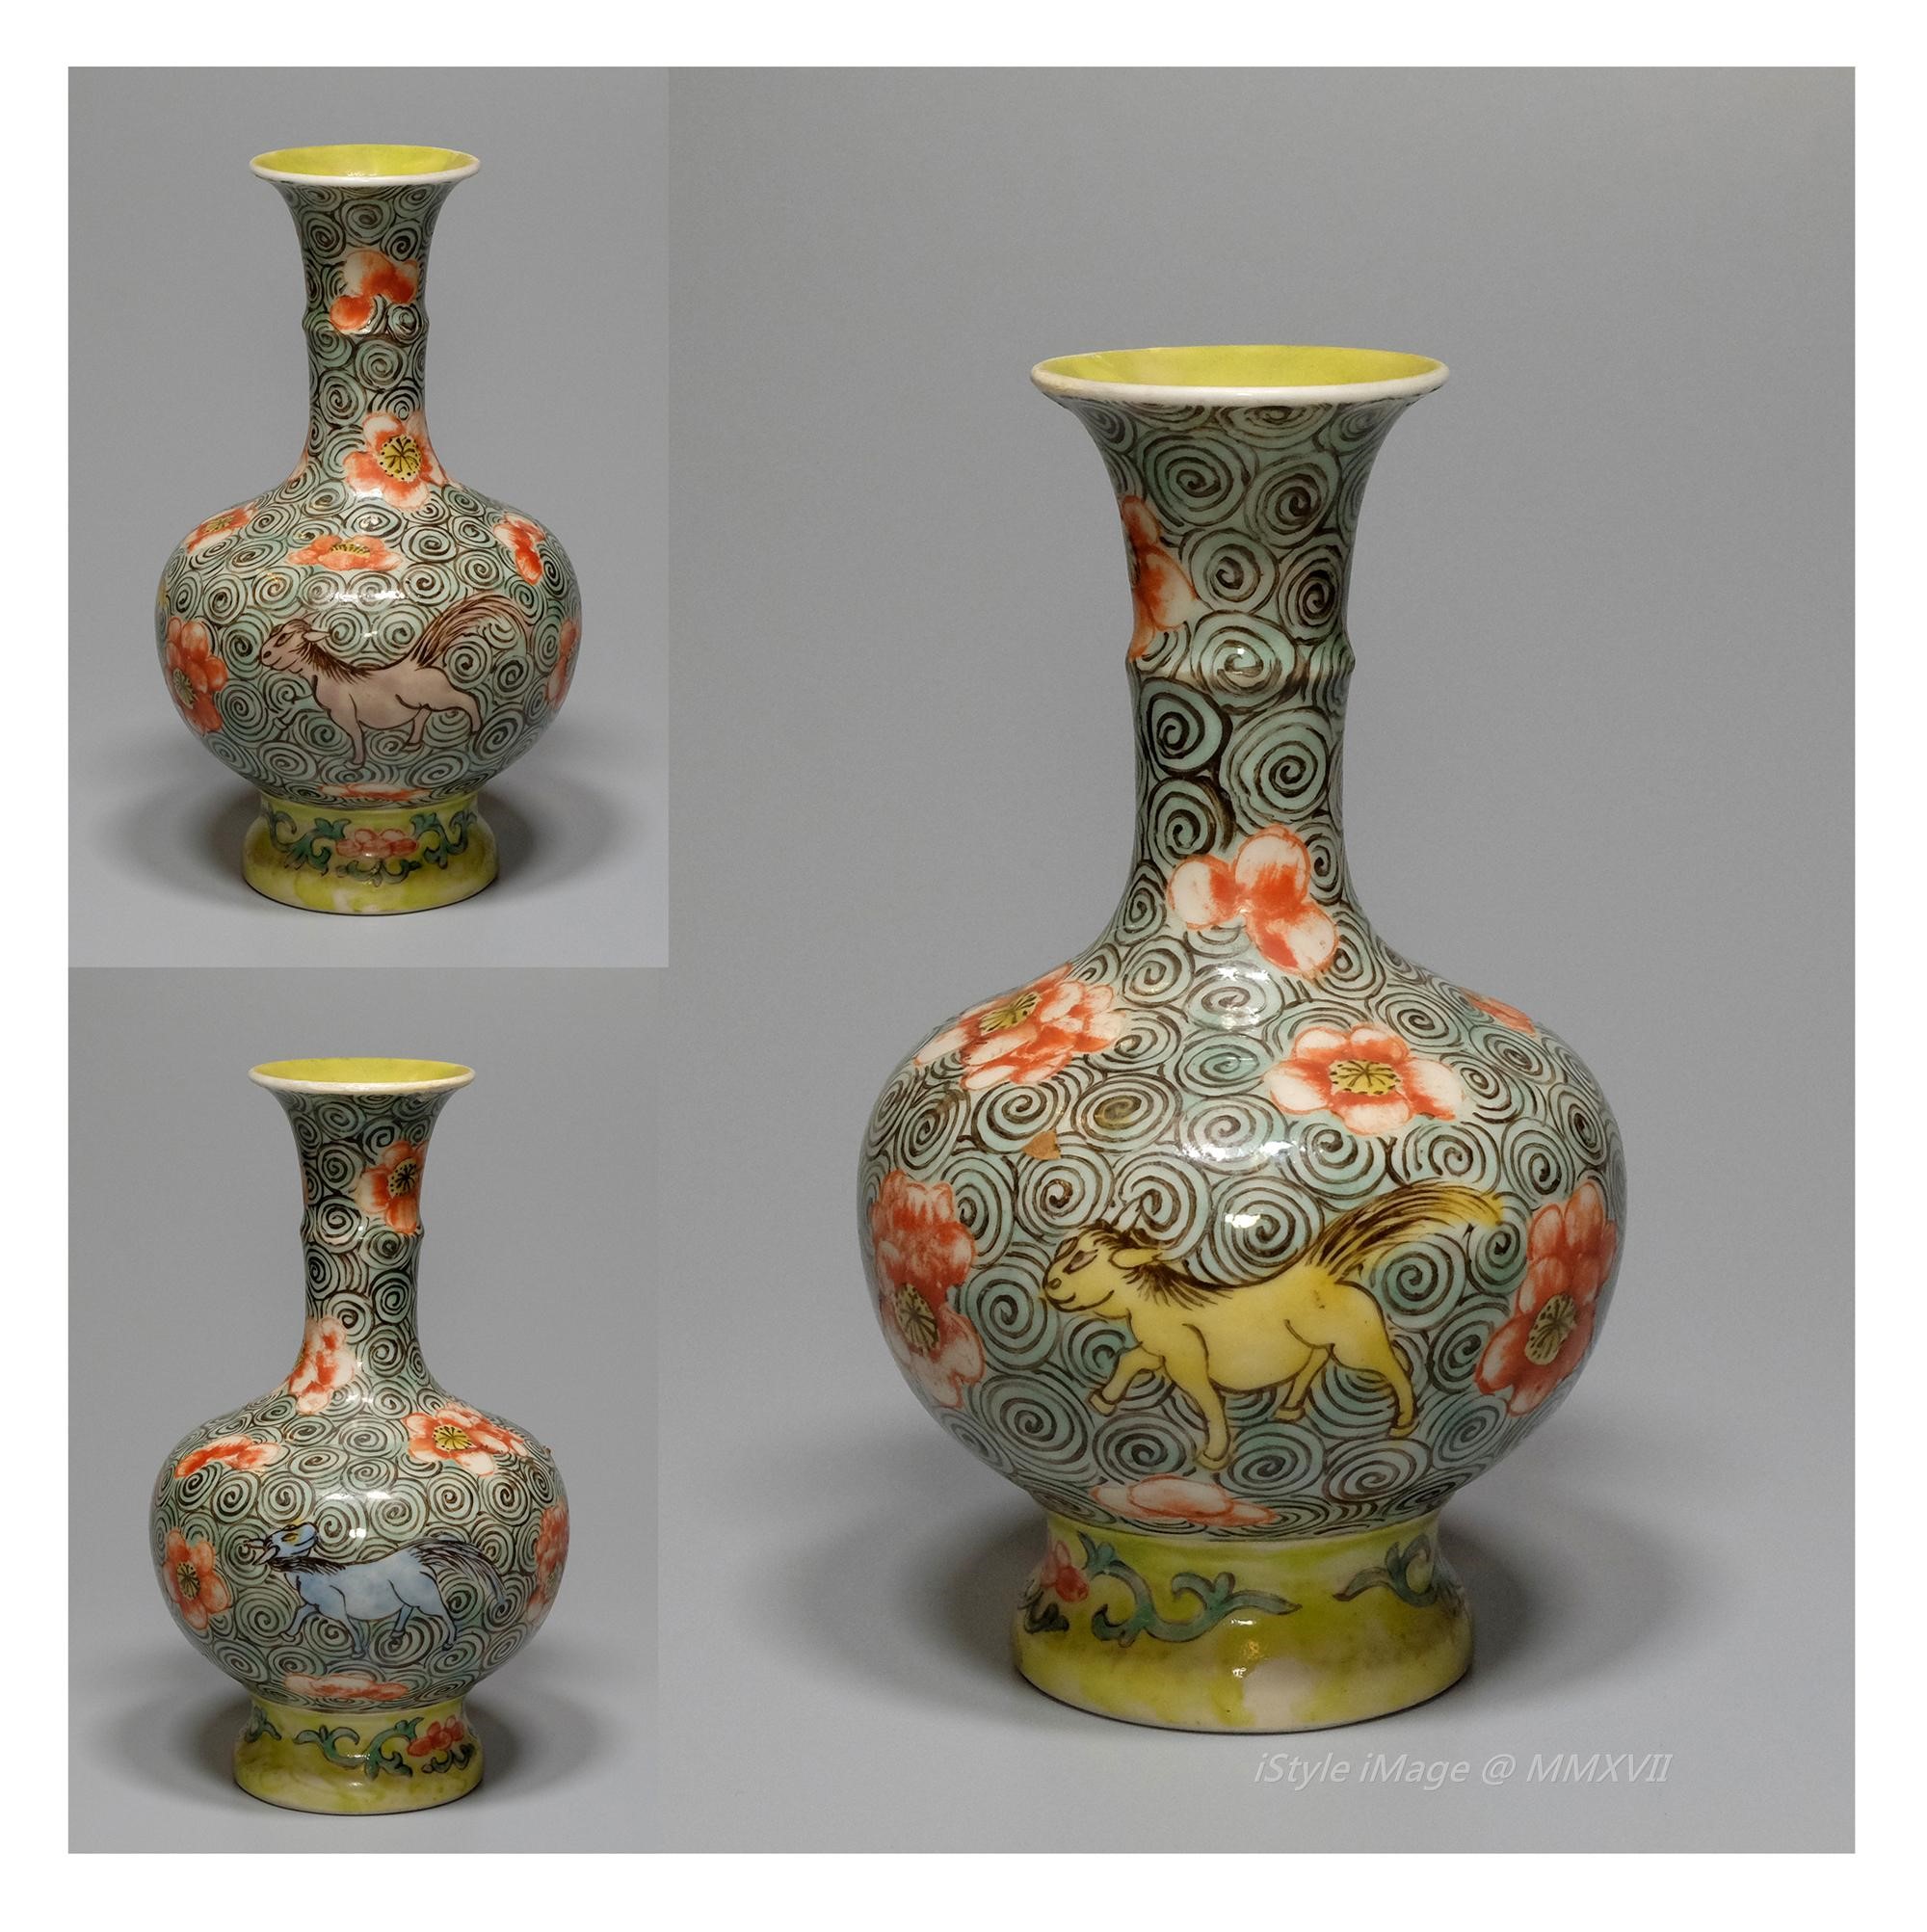 <br><h4>Lot 16 : An exquisite and elegant ovoid form famille-verte vase  ( 50's last century )</h4>
					The exquisite and finely potted body of elegant ovoid form, supported on a splayed foot, painted with two running horses amidst magnolia and scrolling foliage, and a classic scroll foot.
					<br>Measurements (H) high 13.5CM (W)width 7.5CM<br><br><br>精緻優雅的卵形五彩花瓶  ( 上世紀五十年代 )<br>精美優雅卵的形瓶身，支撐在向外微斜的腳上，生動地繪上兩匹在木蘭花和滾動樹葉中的奔馬。<br>尺寸(H)高 13.5 厘米,  (W)濶7.5 厘米